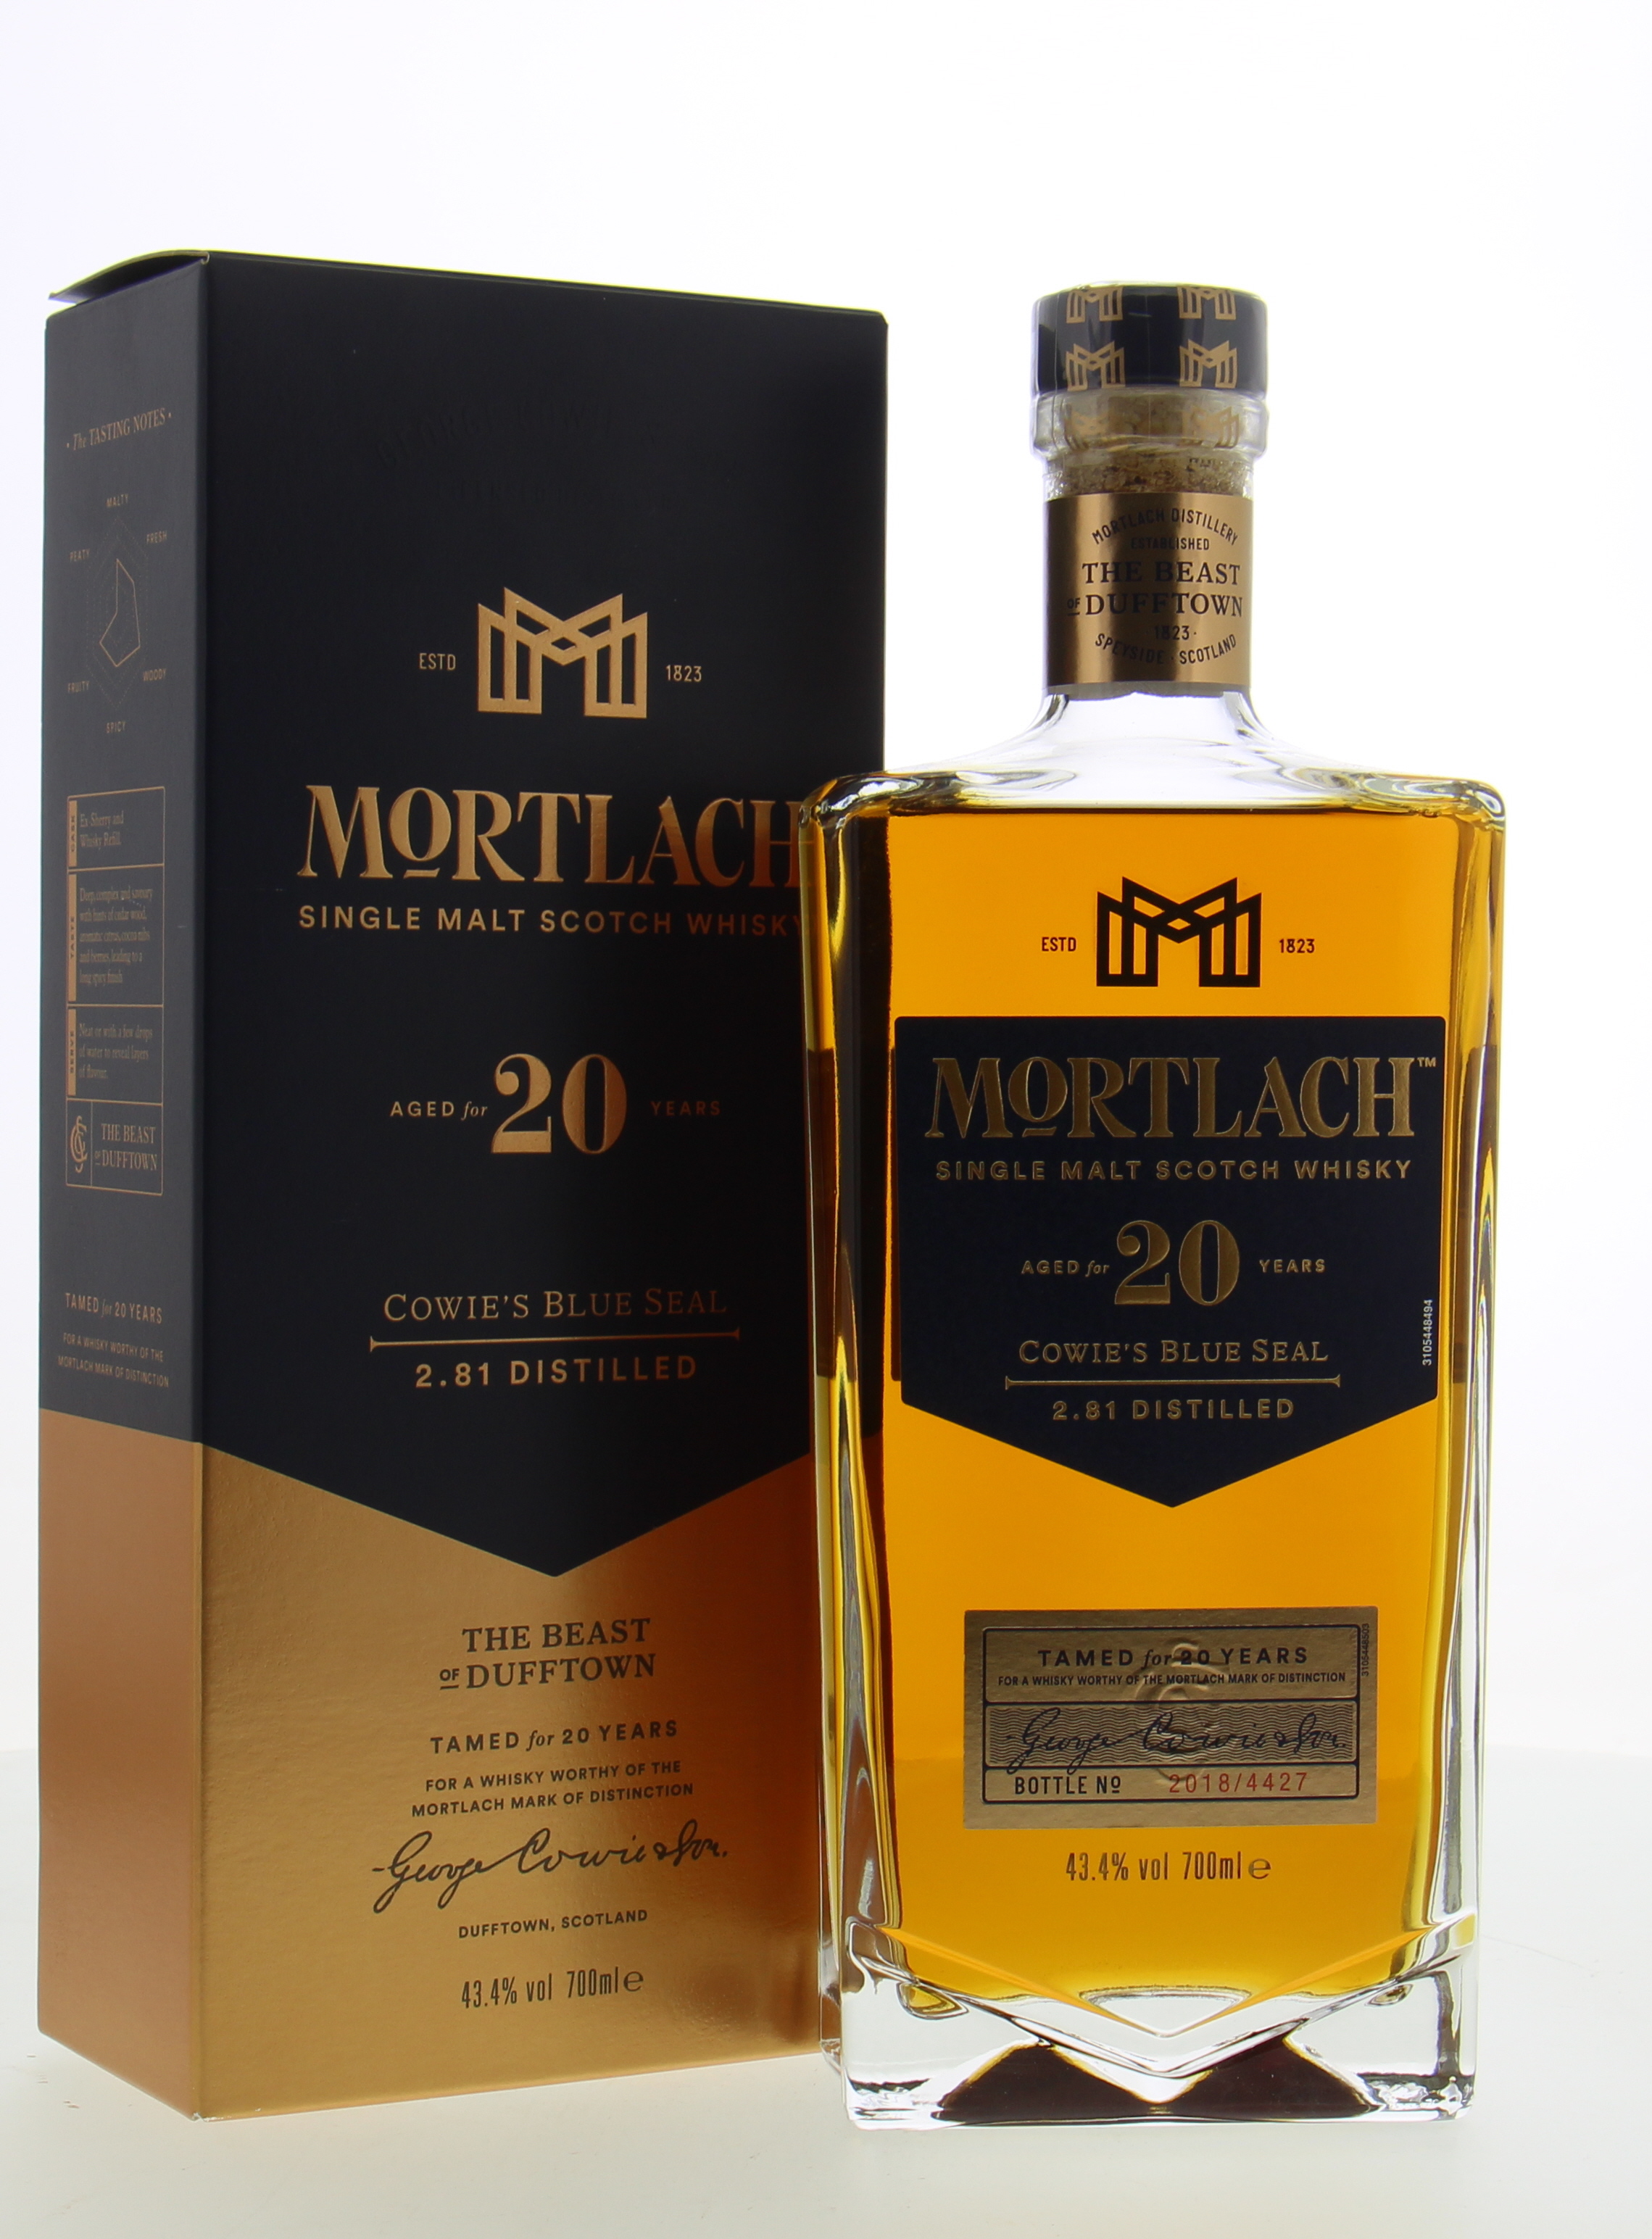 Mortlach - 20 Years Old Cowie's Blue Seal 43.4% NV